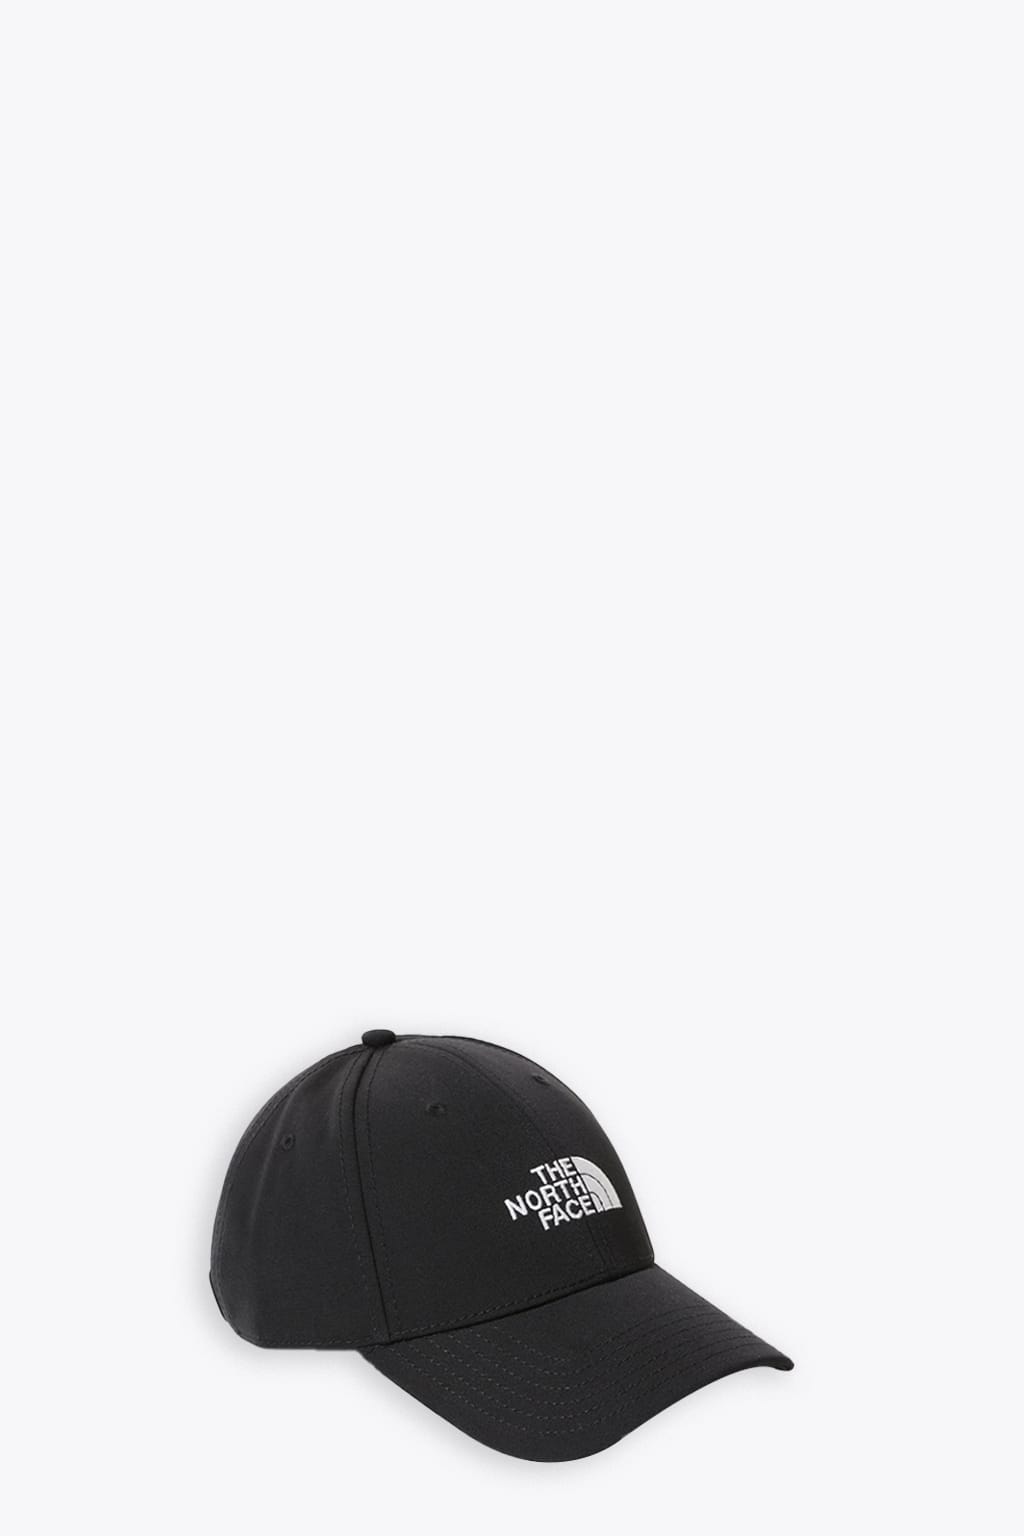 The North Face Recycled 66 Classic Hat Black Cap With Logo Embroidery - Recycled 66 Classic Hat In Nero/bianco